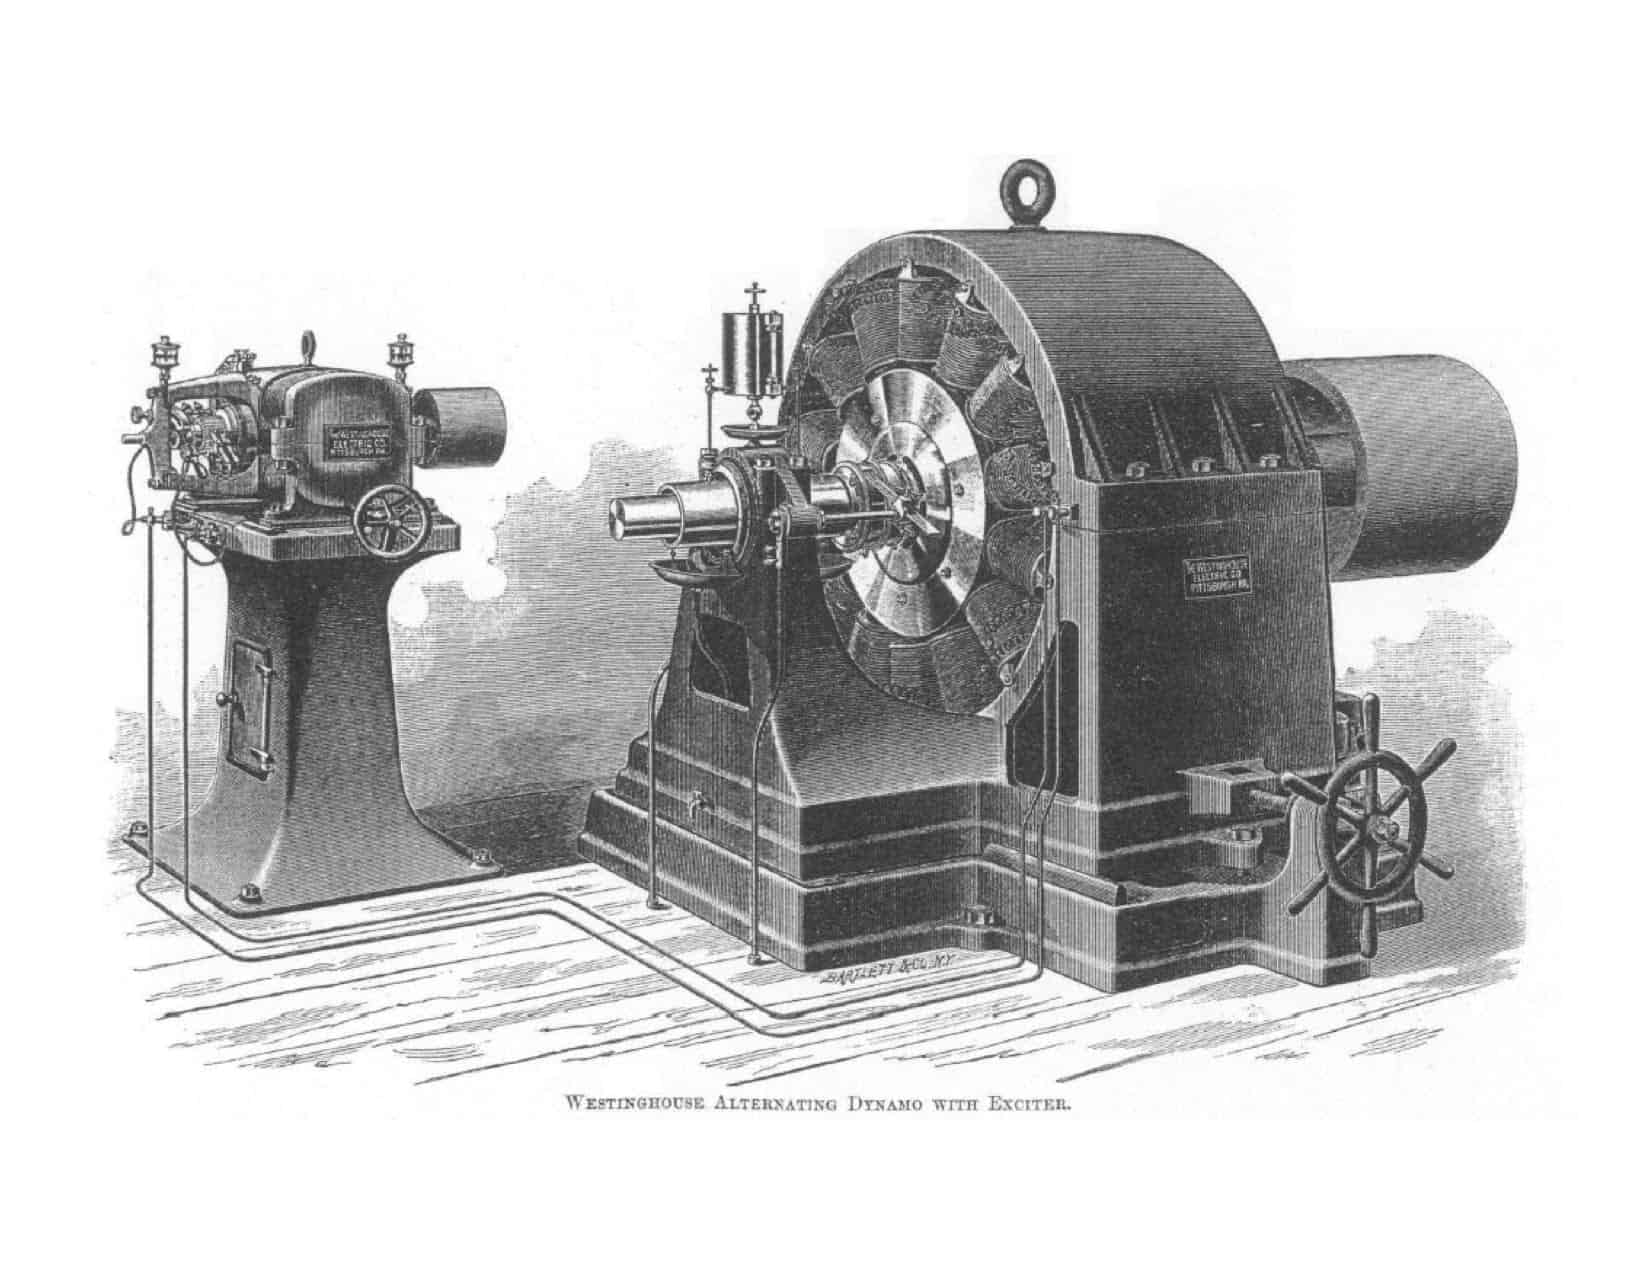 Nicola Tesla's AC turbine design was acquired by Westinghouse